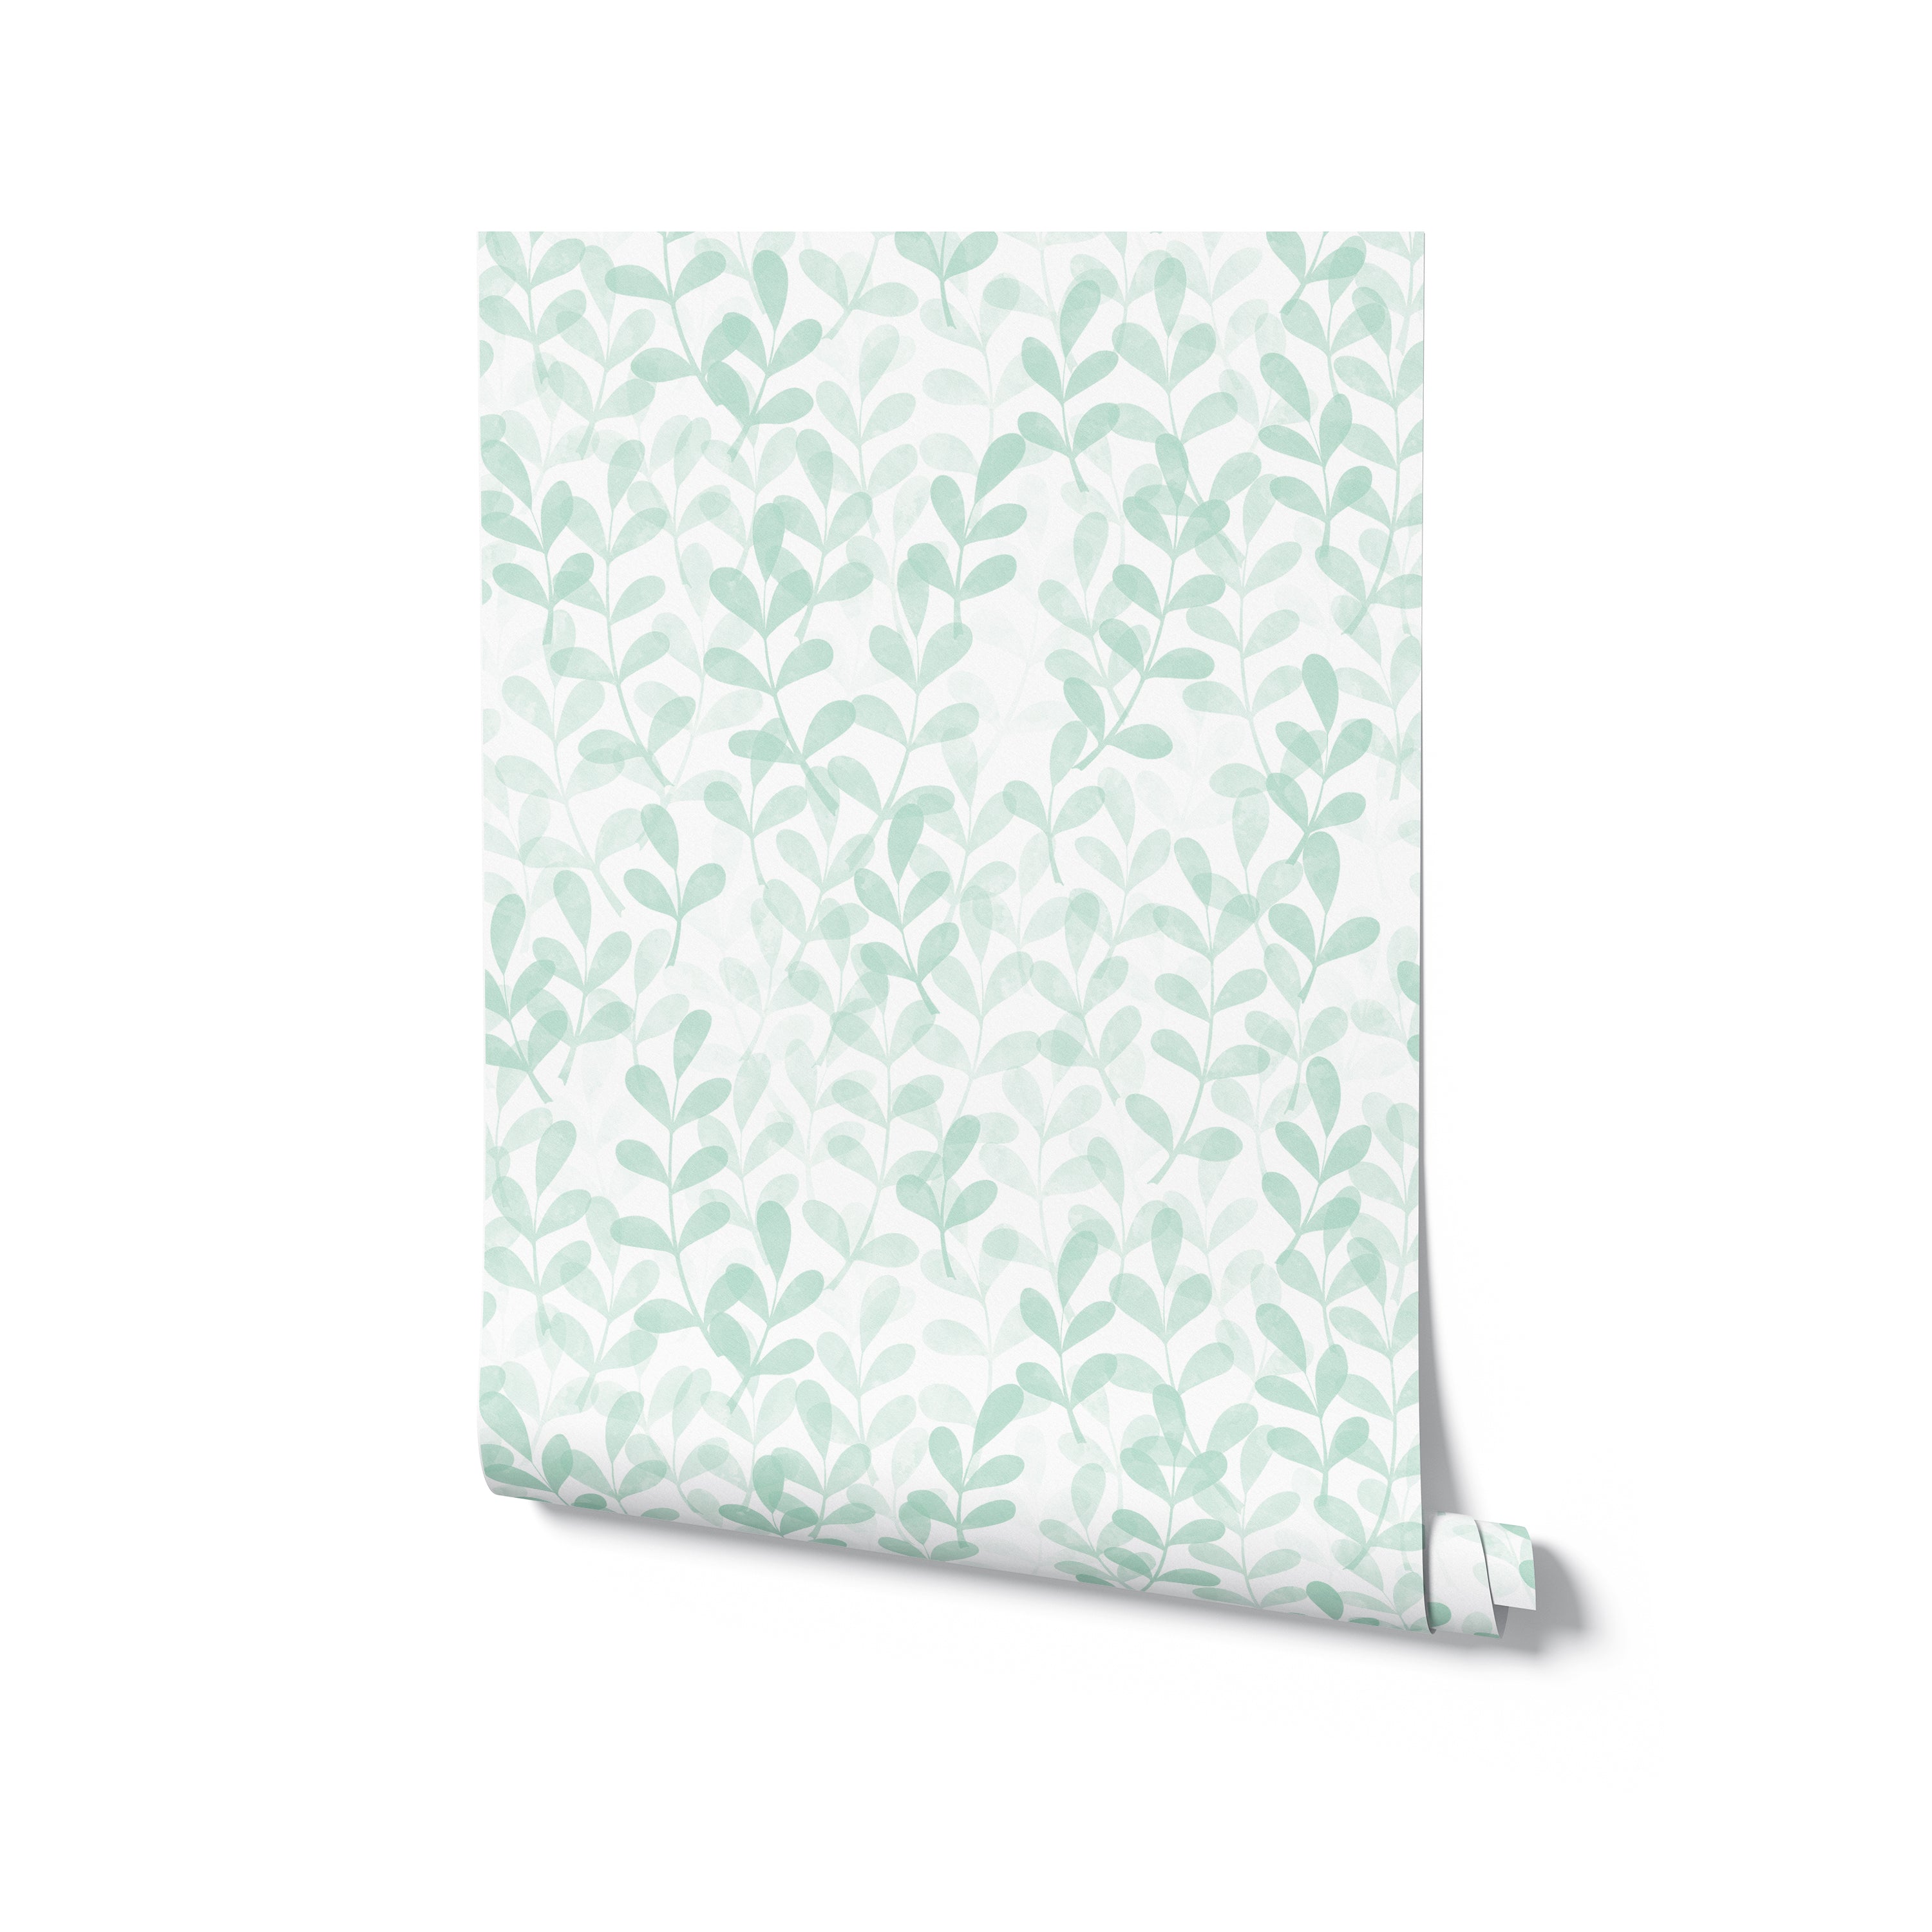 A roll of wallpaper displaying a mint green leafy pattern on a white background. The small leaves are arranged in a vertical pattern, providing a refreshing and soothing look.